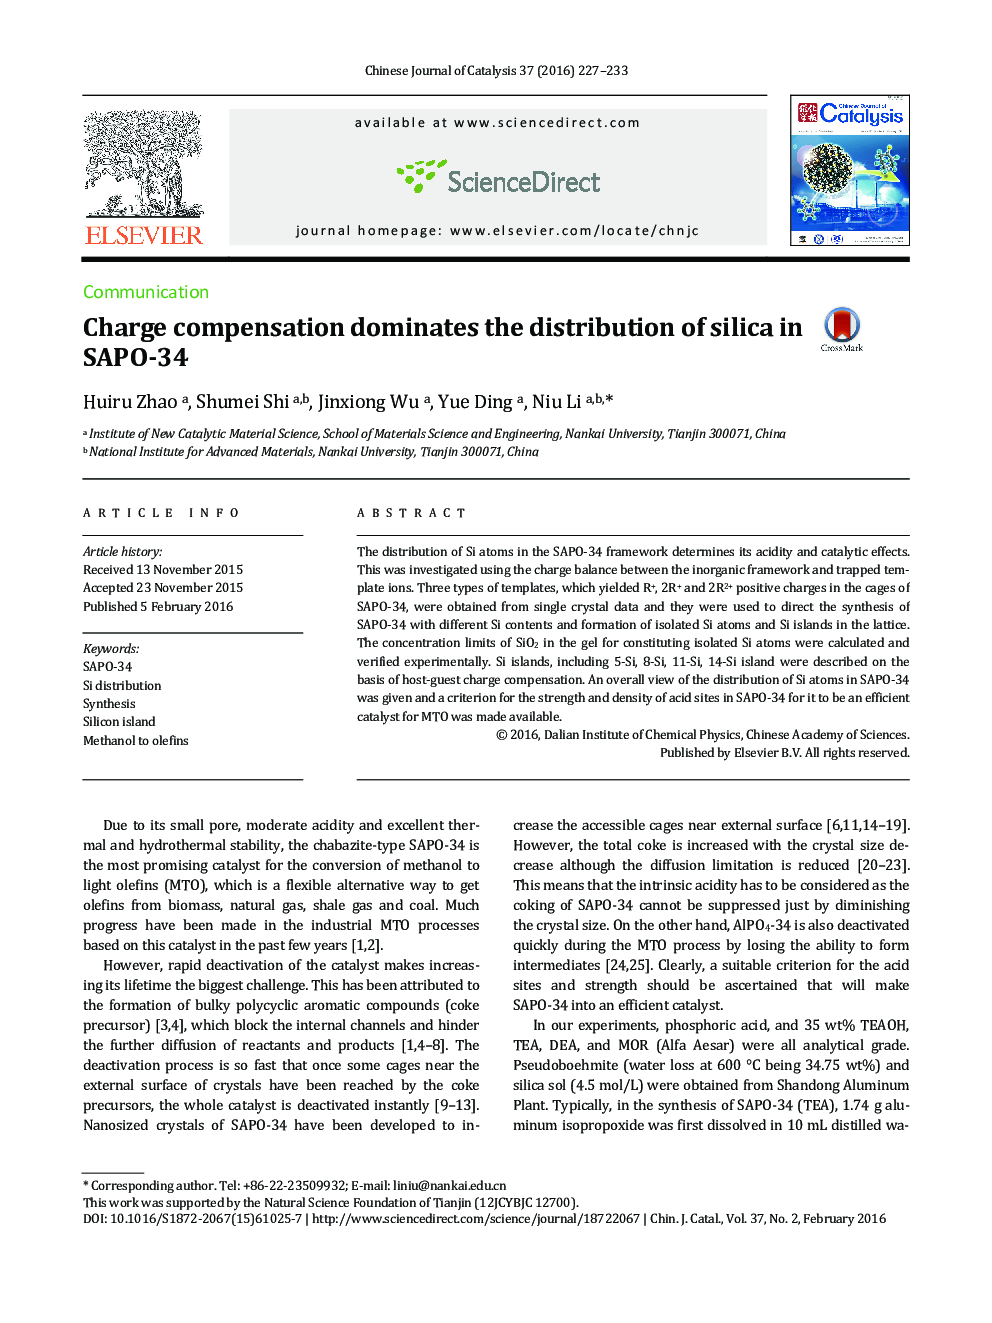 Charge compensation dominates the distribution of silica in SAPO-34 